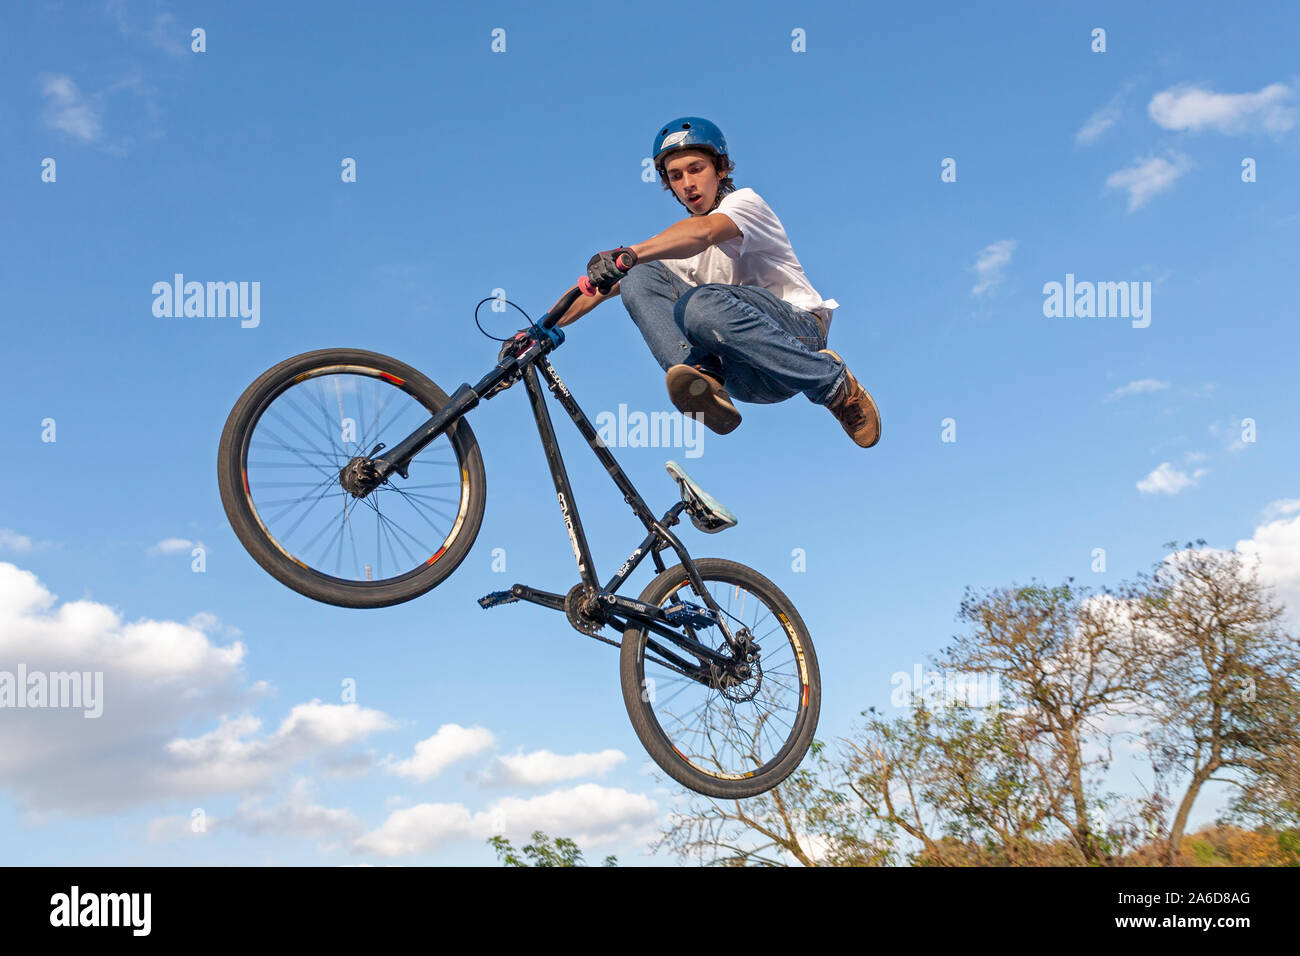 A teenage boy is jumping with his bike. Stock Photo